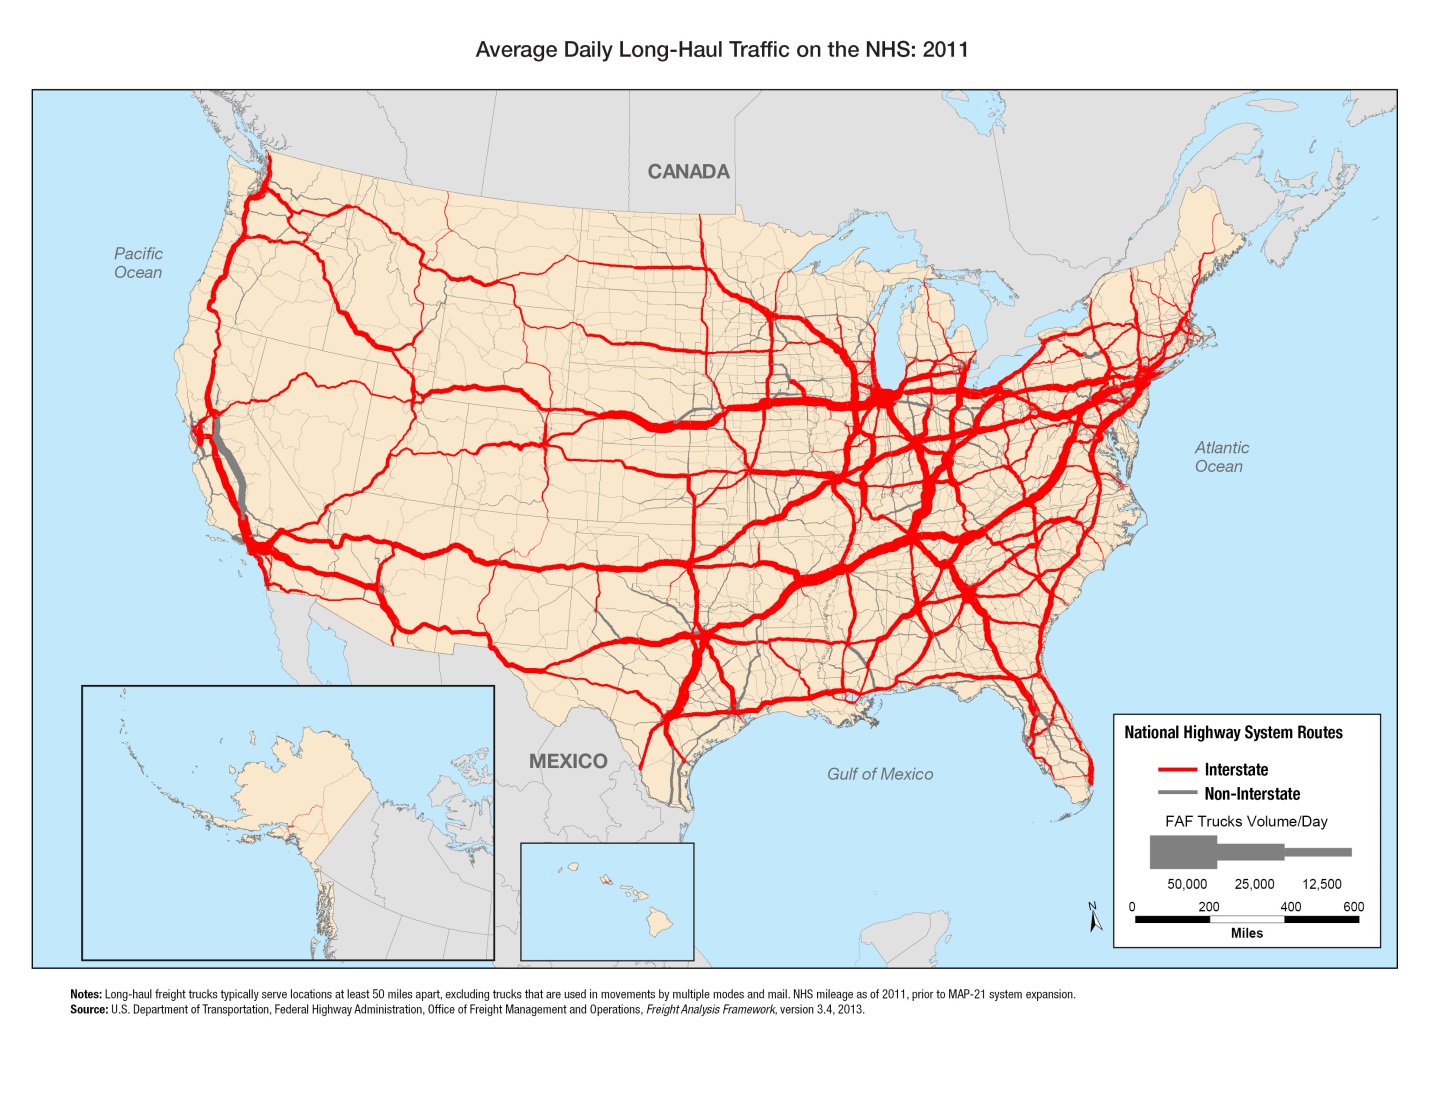 An outline map of the 48 contiguous states and insets for Alaska and Hawaii show the interstate and non-interstate routes for freight on the National Highway System. Freight volume is indicated by line thickness for 50,000 trucks per day, 25,000 trucks per day, and 12,500 trucks per day. The interstates with the highest volume per day run primarily from Massachusetts to Texas, from Ohio to Tennessee, and from Illinois to neighboring states. The interstates with 25,000 trucks per day run mainly across the southwestern states, across the Great Plains states, and along the Pacific coast. The interstates with 12,500 trucks per day run mainly across the upper northern states from the Midwest to the Pacific coast, as well as through the Great Plains states. Non-interstate highway system routes have the highest volume in California. Source: U.S. Department of Transportation, Federal Highway Administration, Office of Freight Management and Operations, Freight Analysis Framework, Version 3.4, 2013.